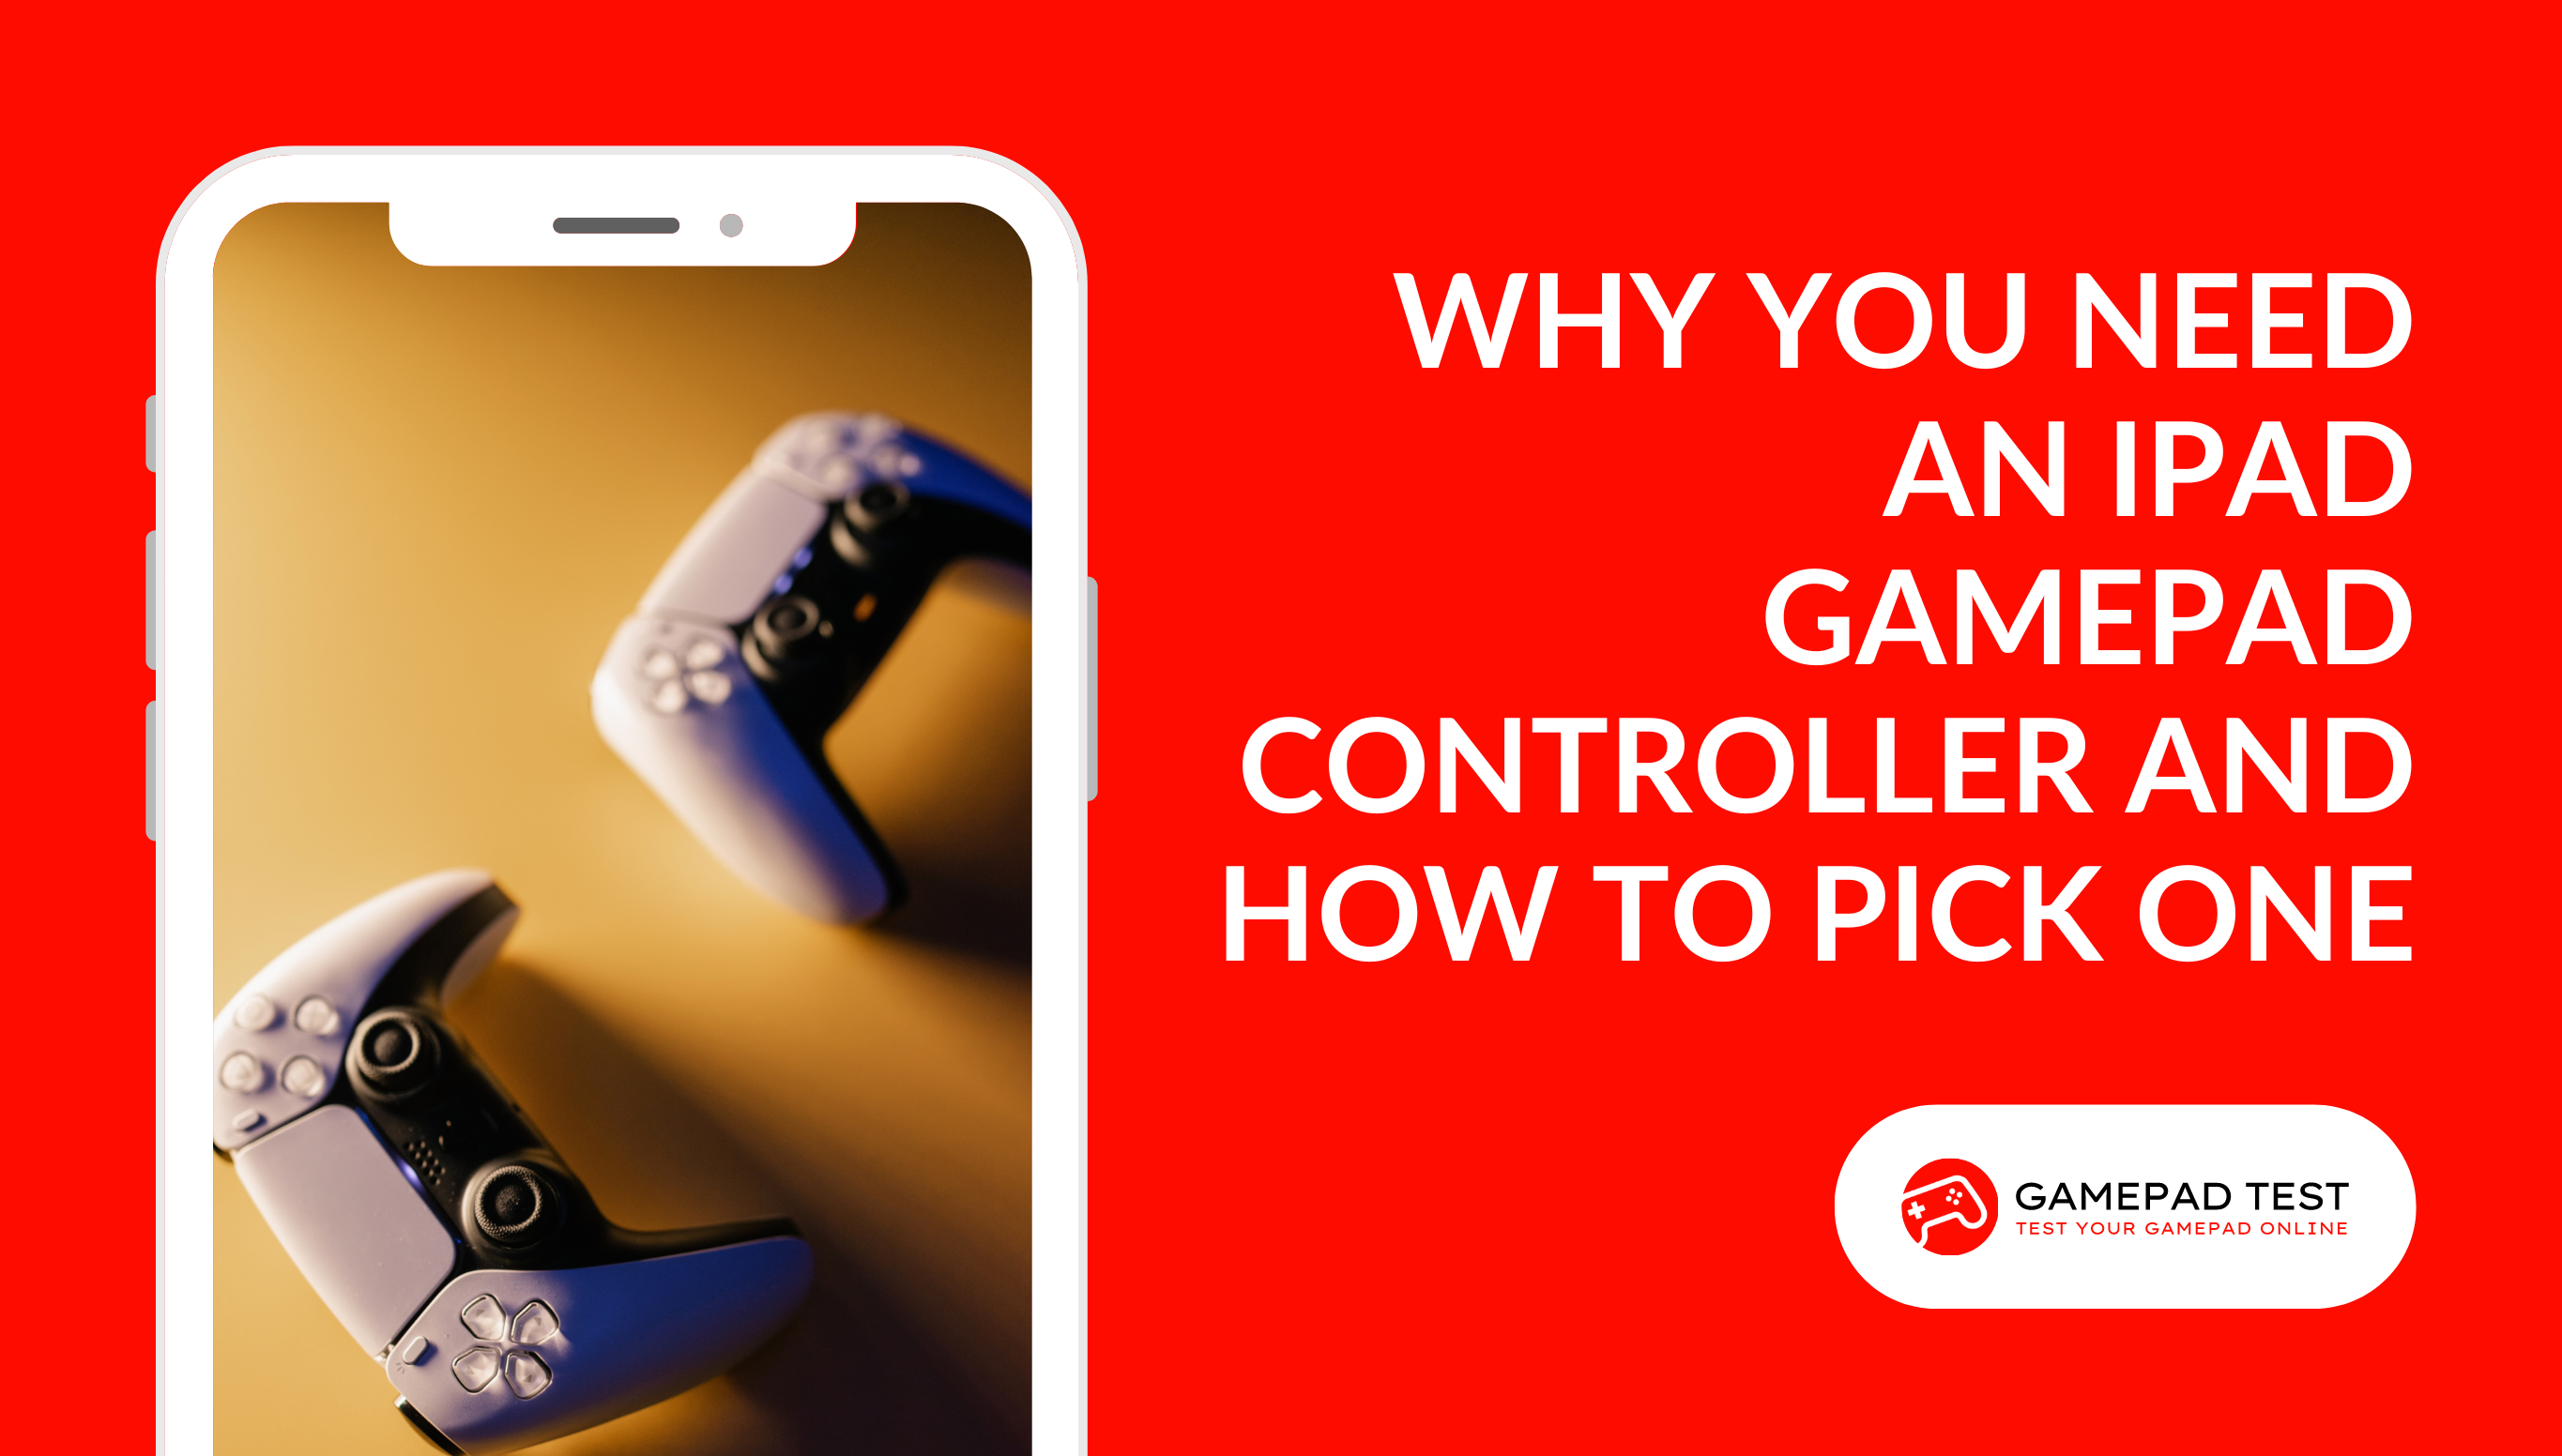 Why You Need an iPad Gamepad Controller and How to Pick One